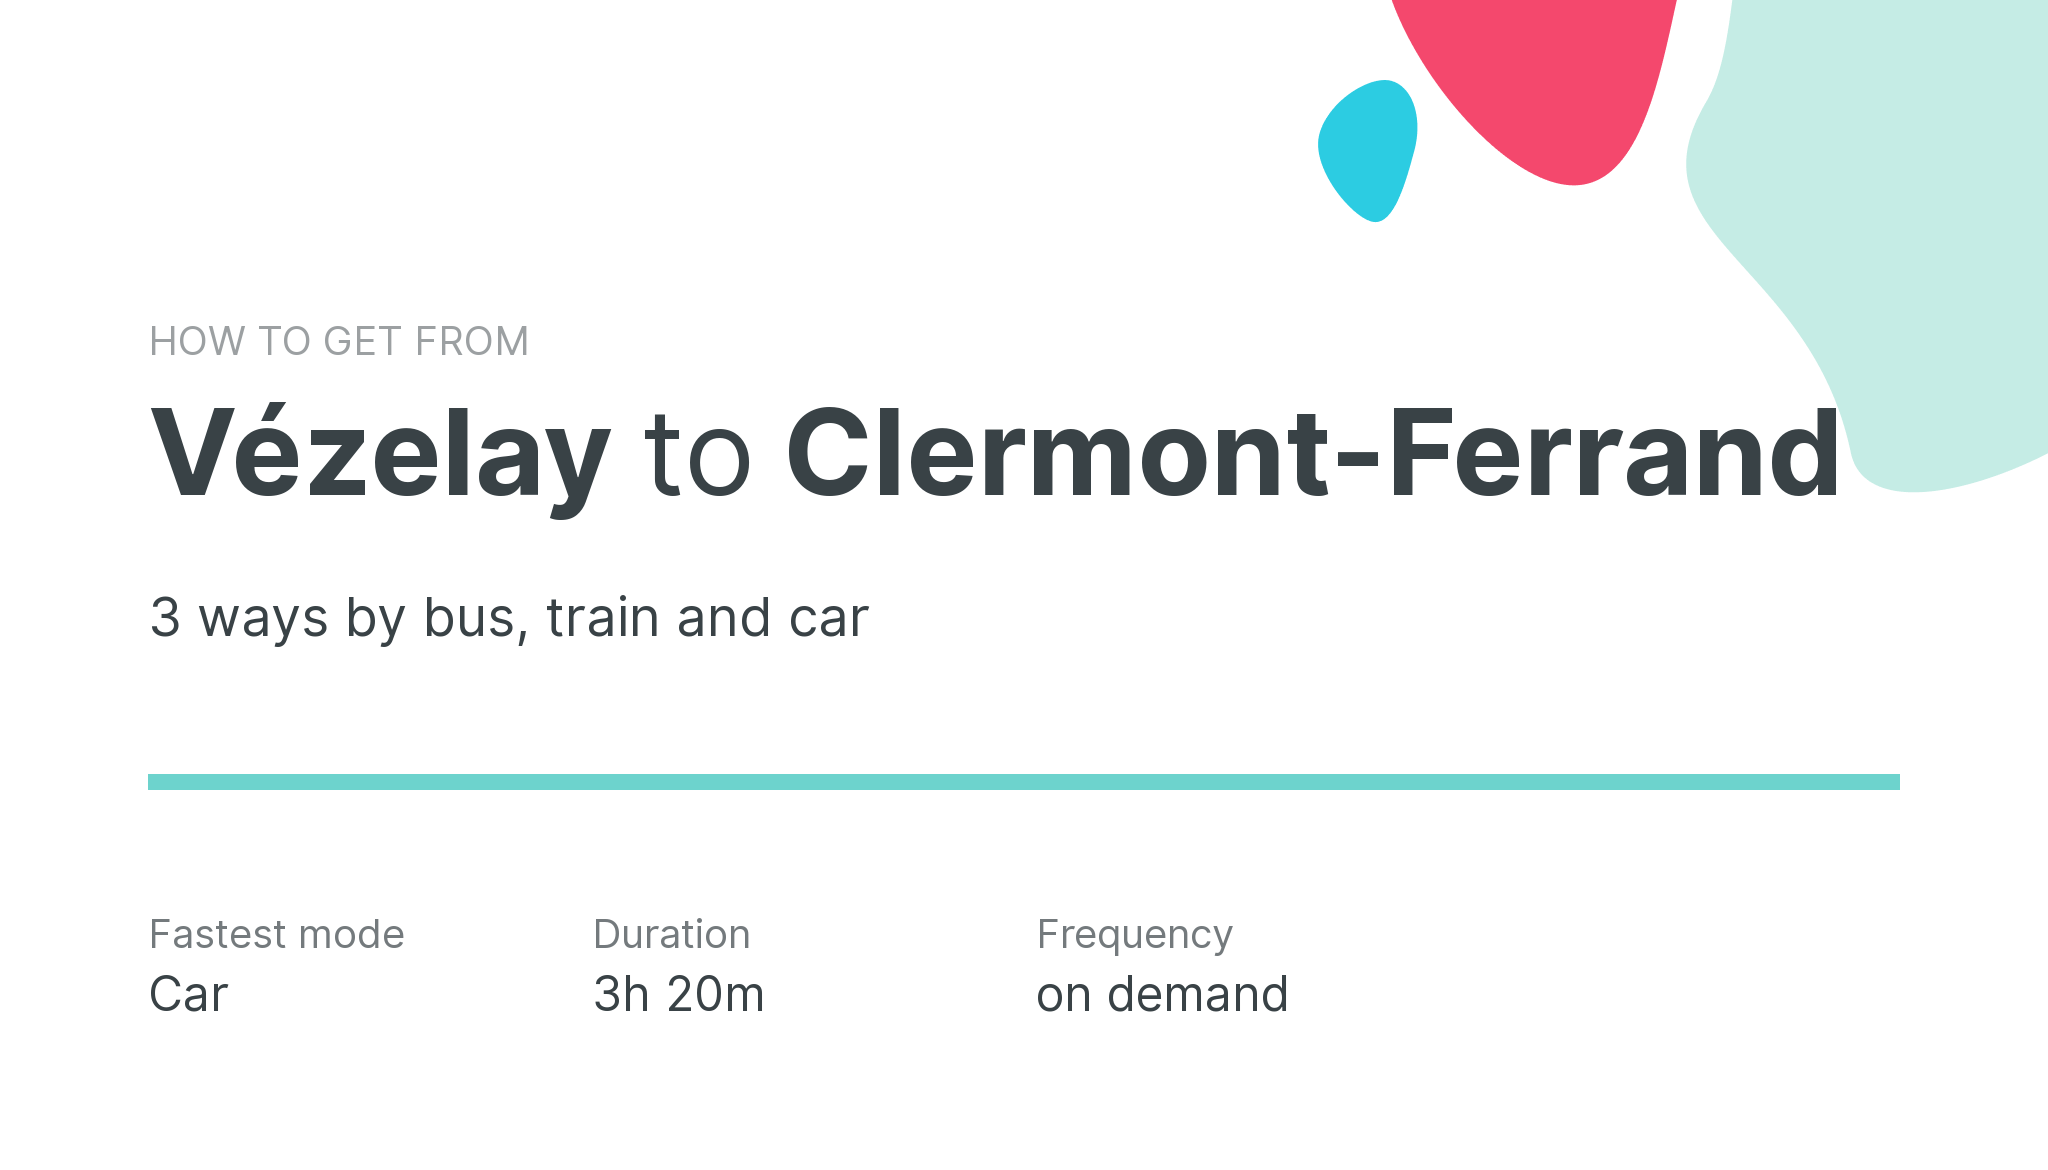 How do I get from Vézelay to Clermont-Ferrand